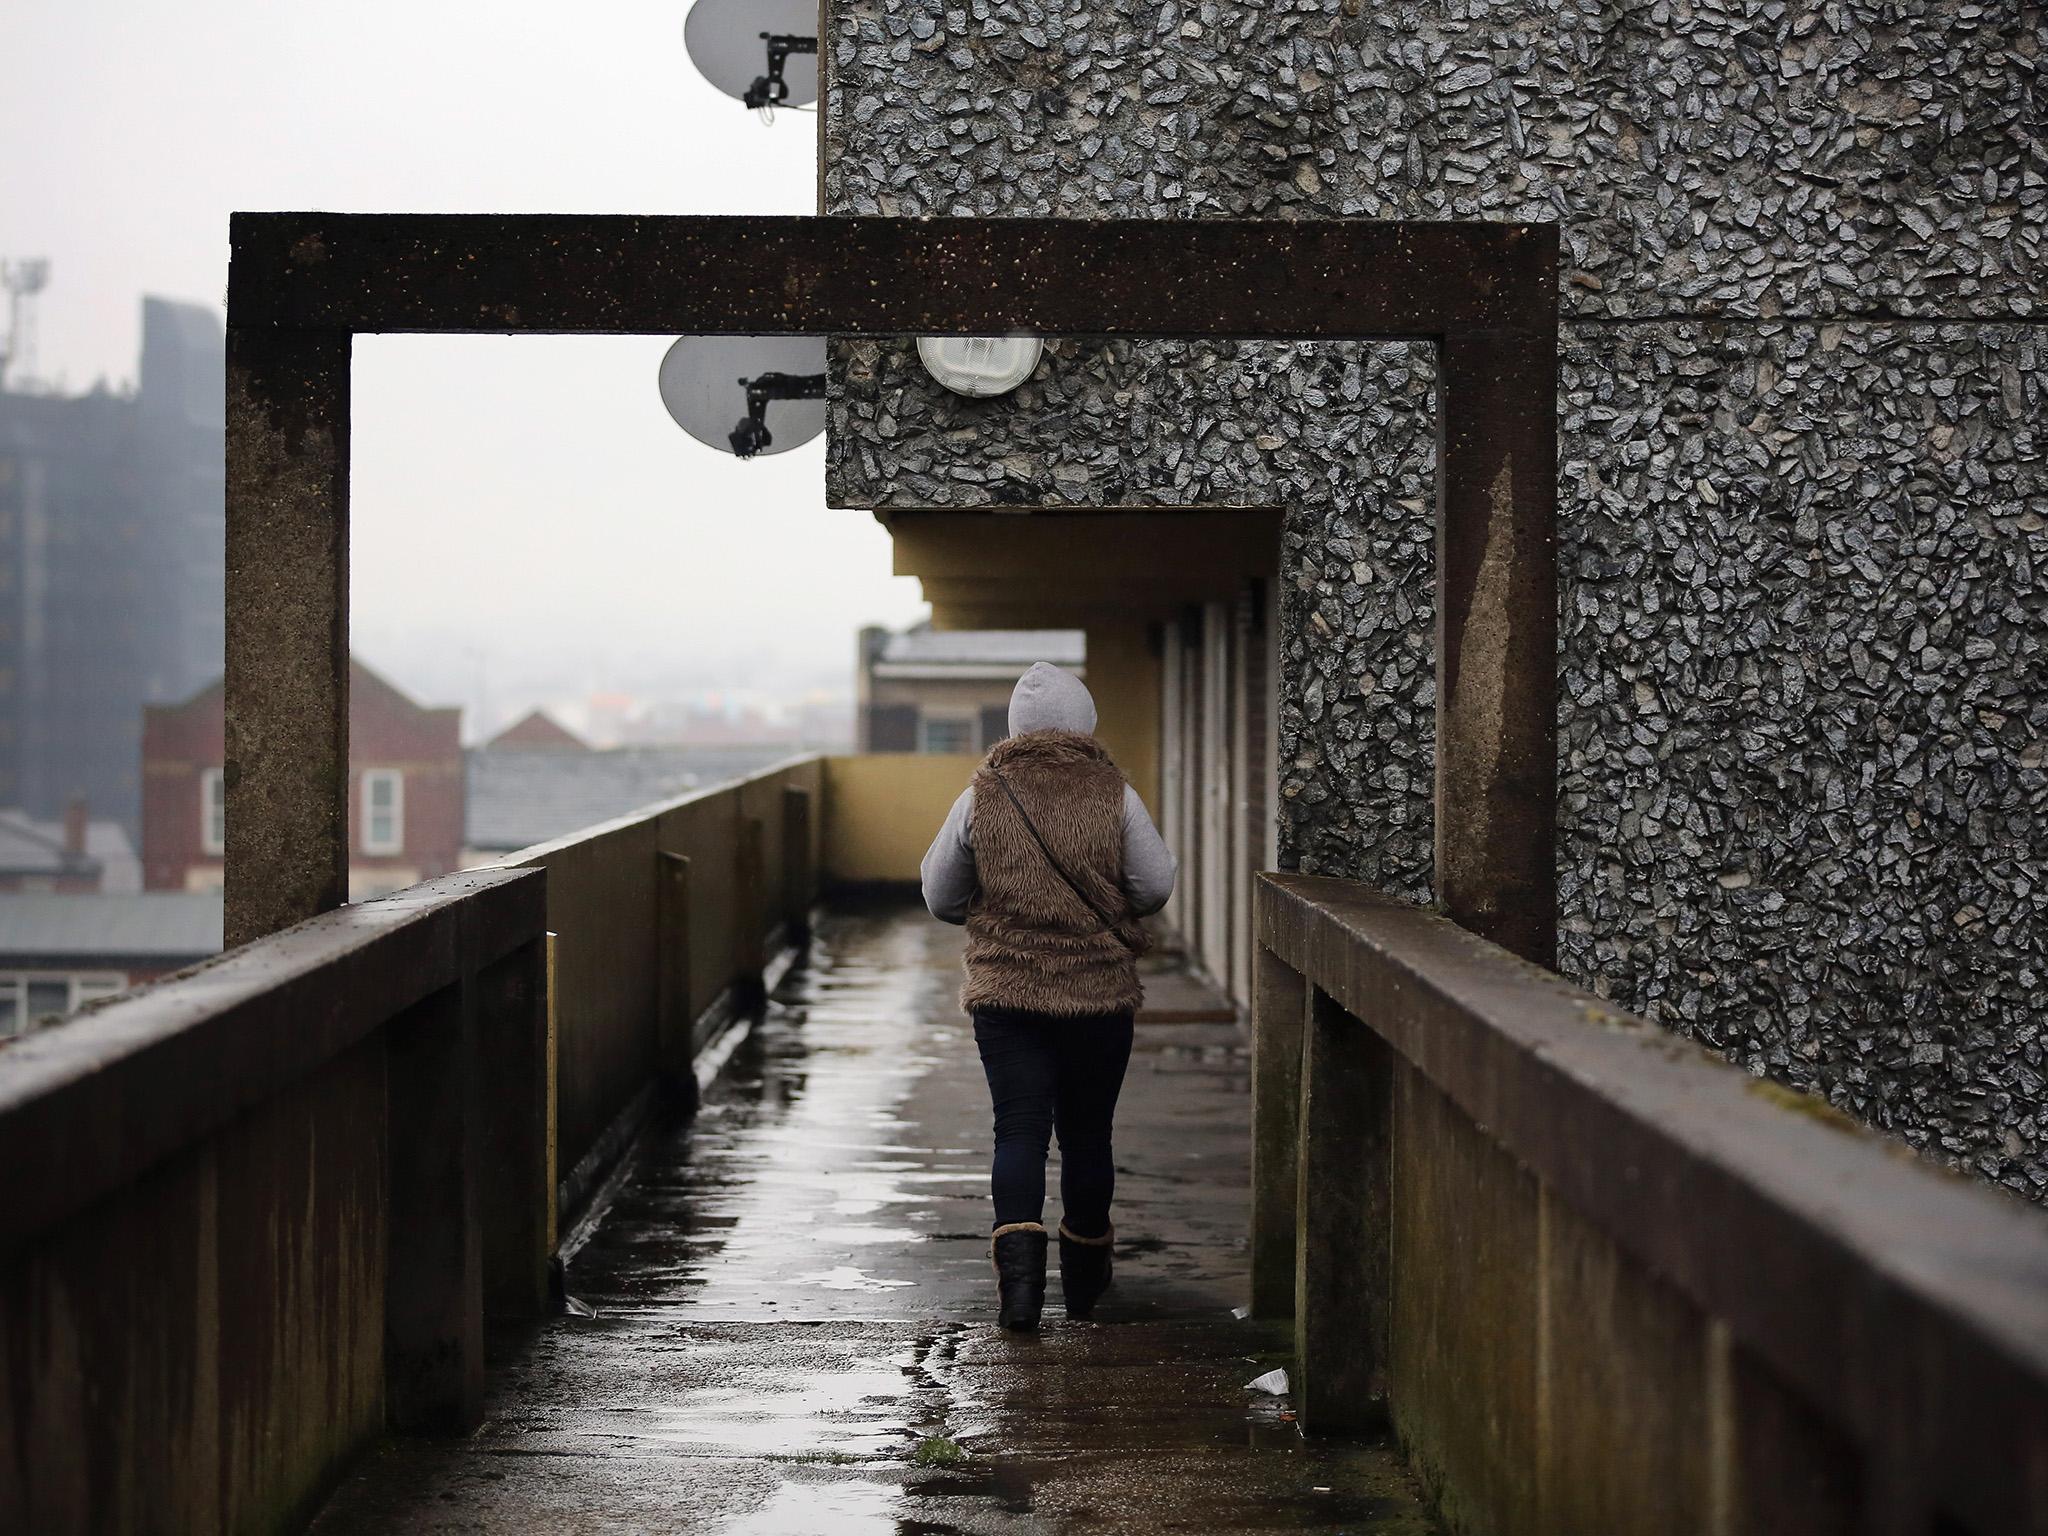 Figures show there were 18,794 deaths from causes that are considered avoidable in socially deprived areas